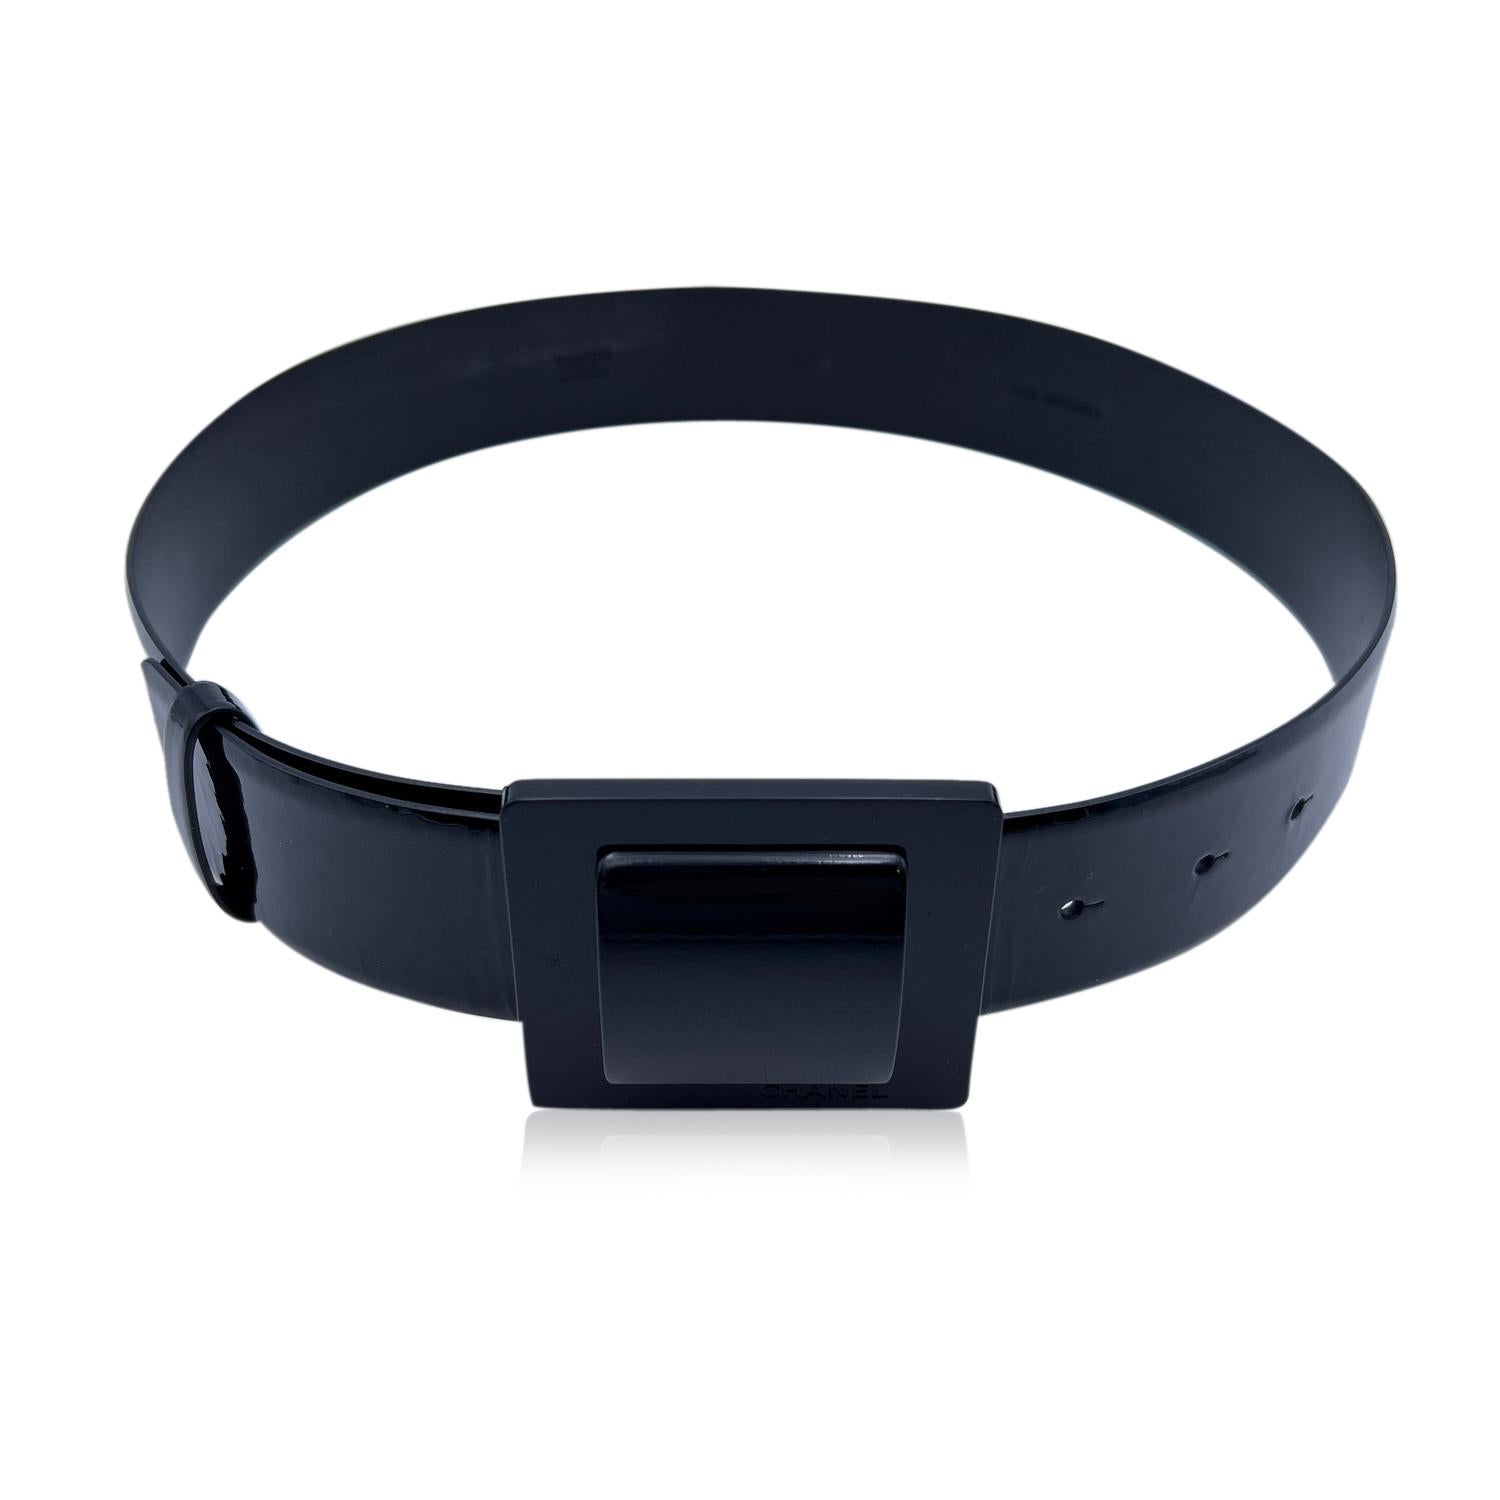 CHANEL black patent leather belt with black squared buckle. 'Chanel - 07 CC A - Made in Italy' engraved on the reverse of the belt. Size 36. Width: 1.6 inches - 4 cm. Total length of the strap: 33.25 inches - 84.5 cm. From buckle to first notch